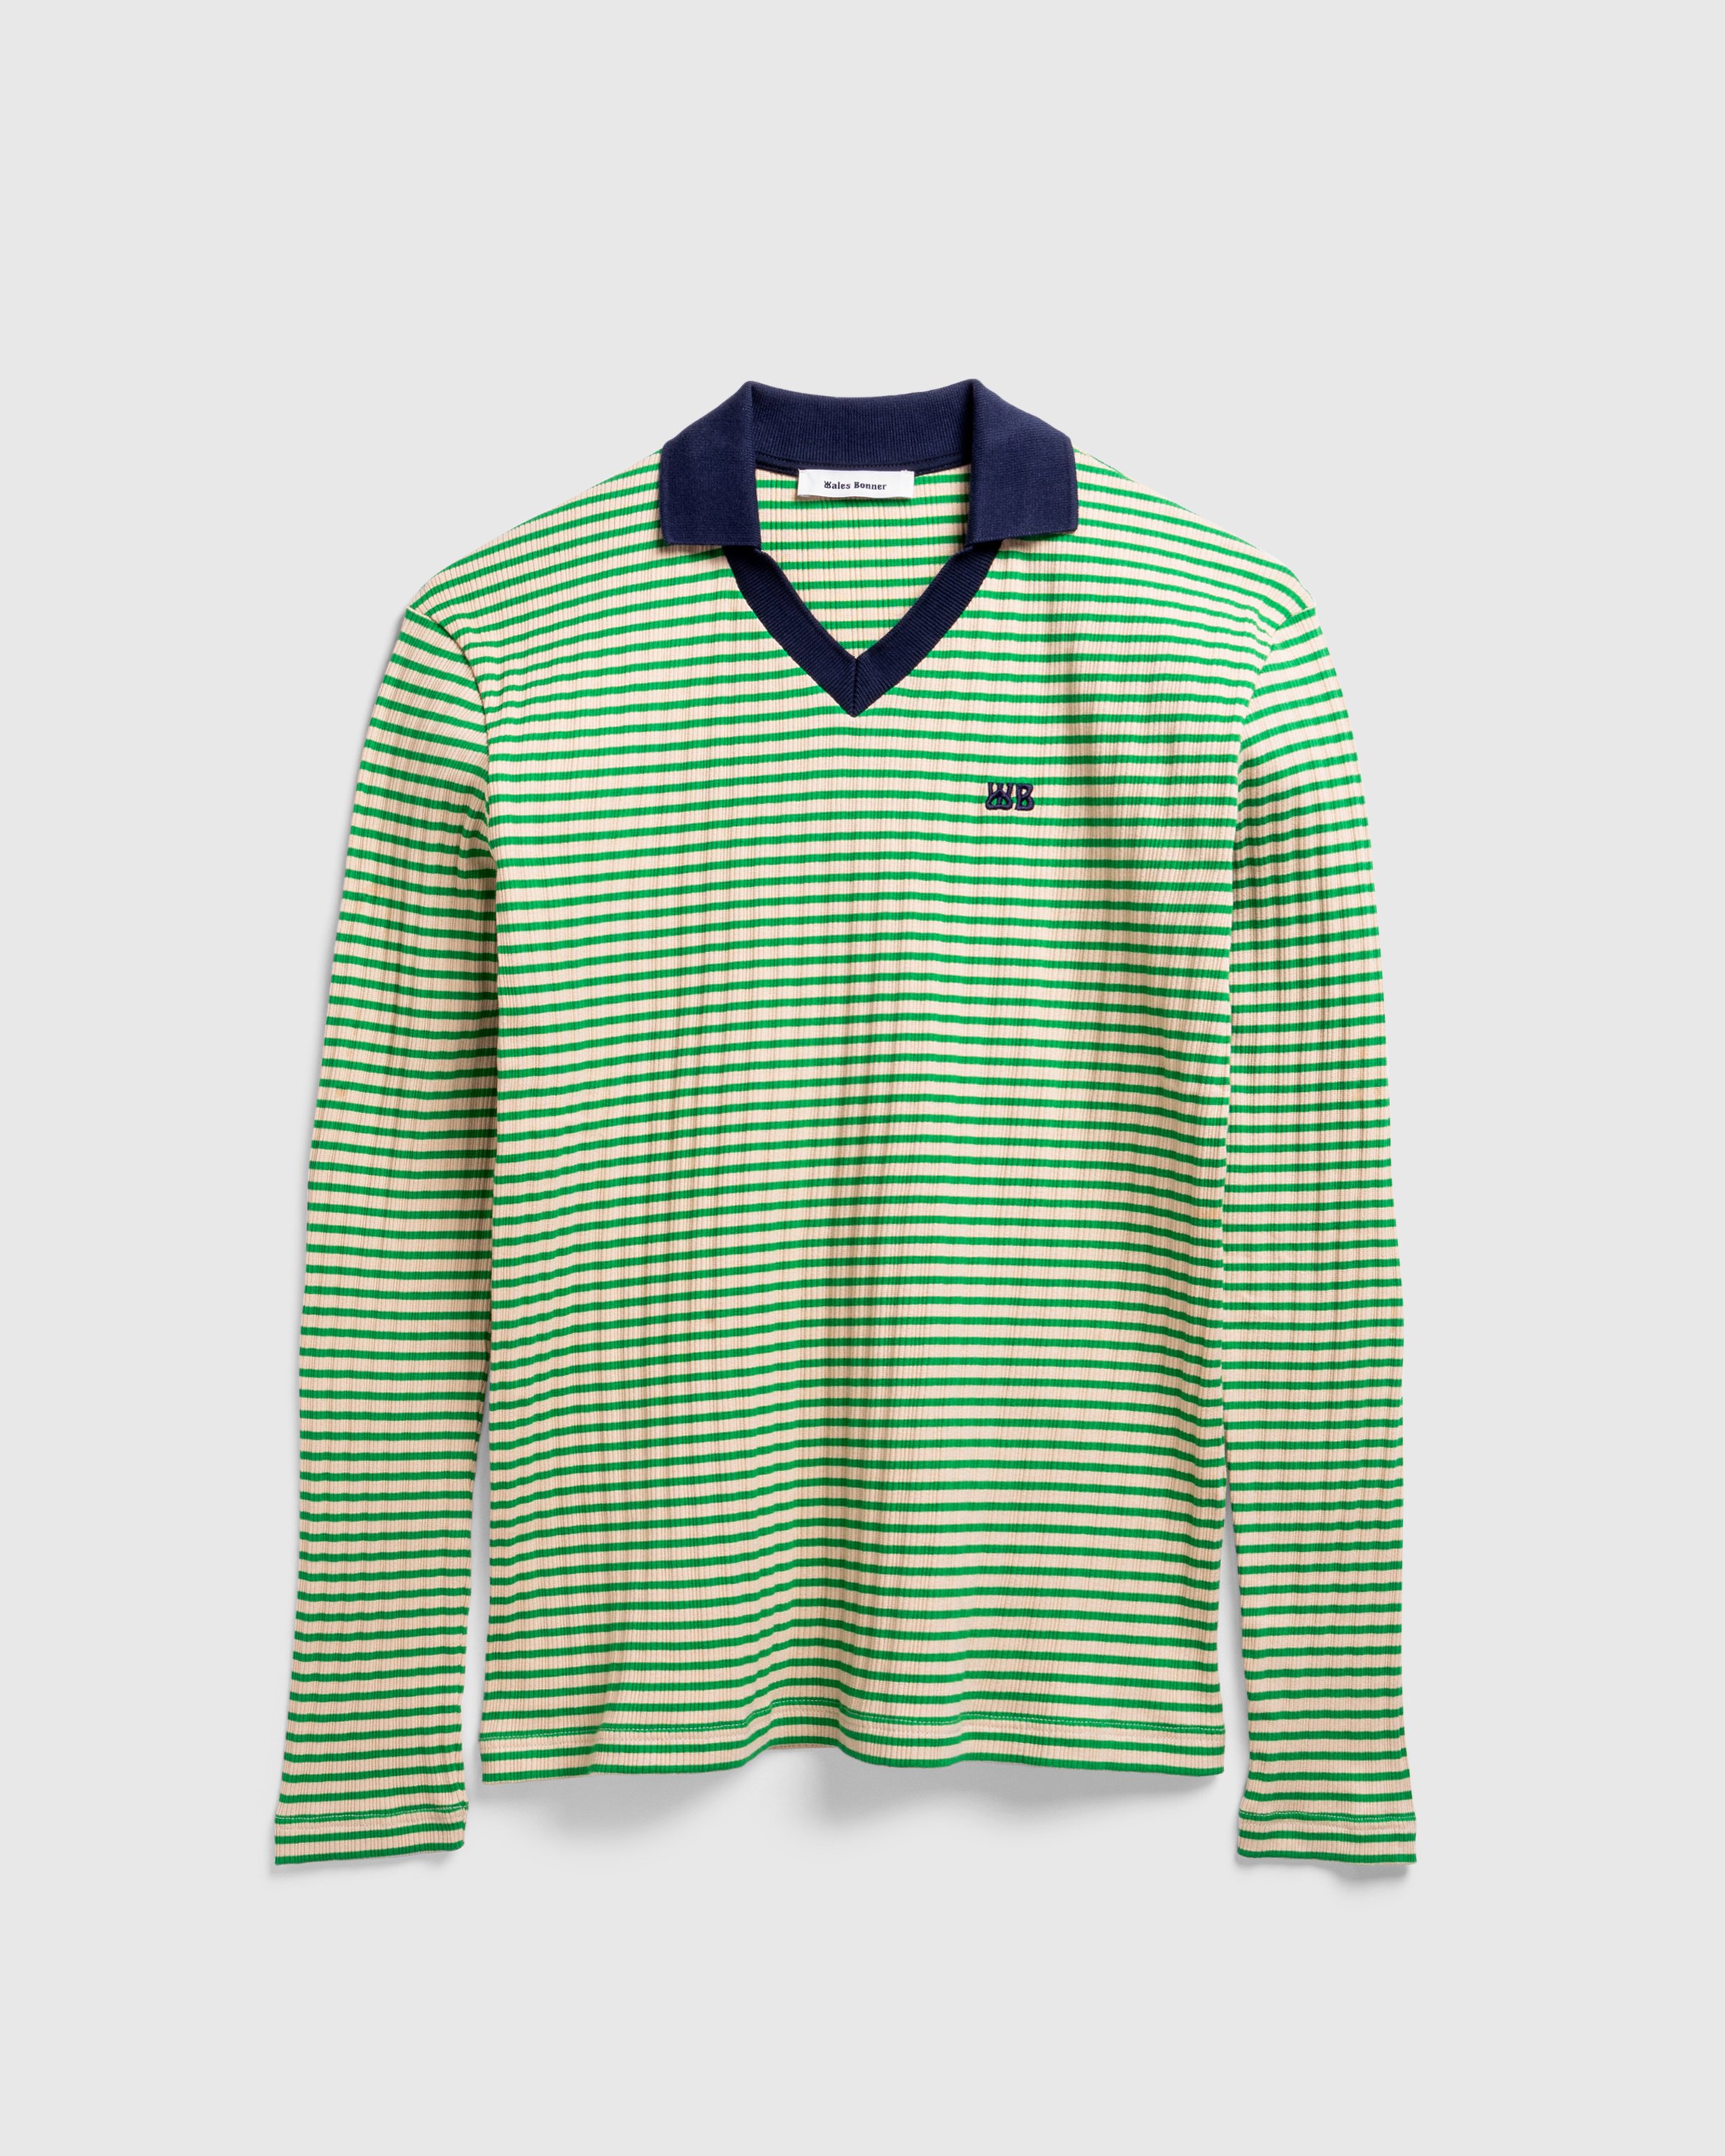 Wales Bonner - Polo Striped Green - Clothing - Green - Image 1